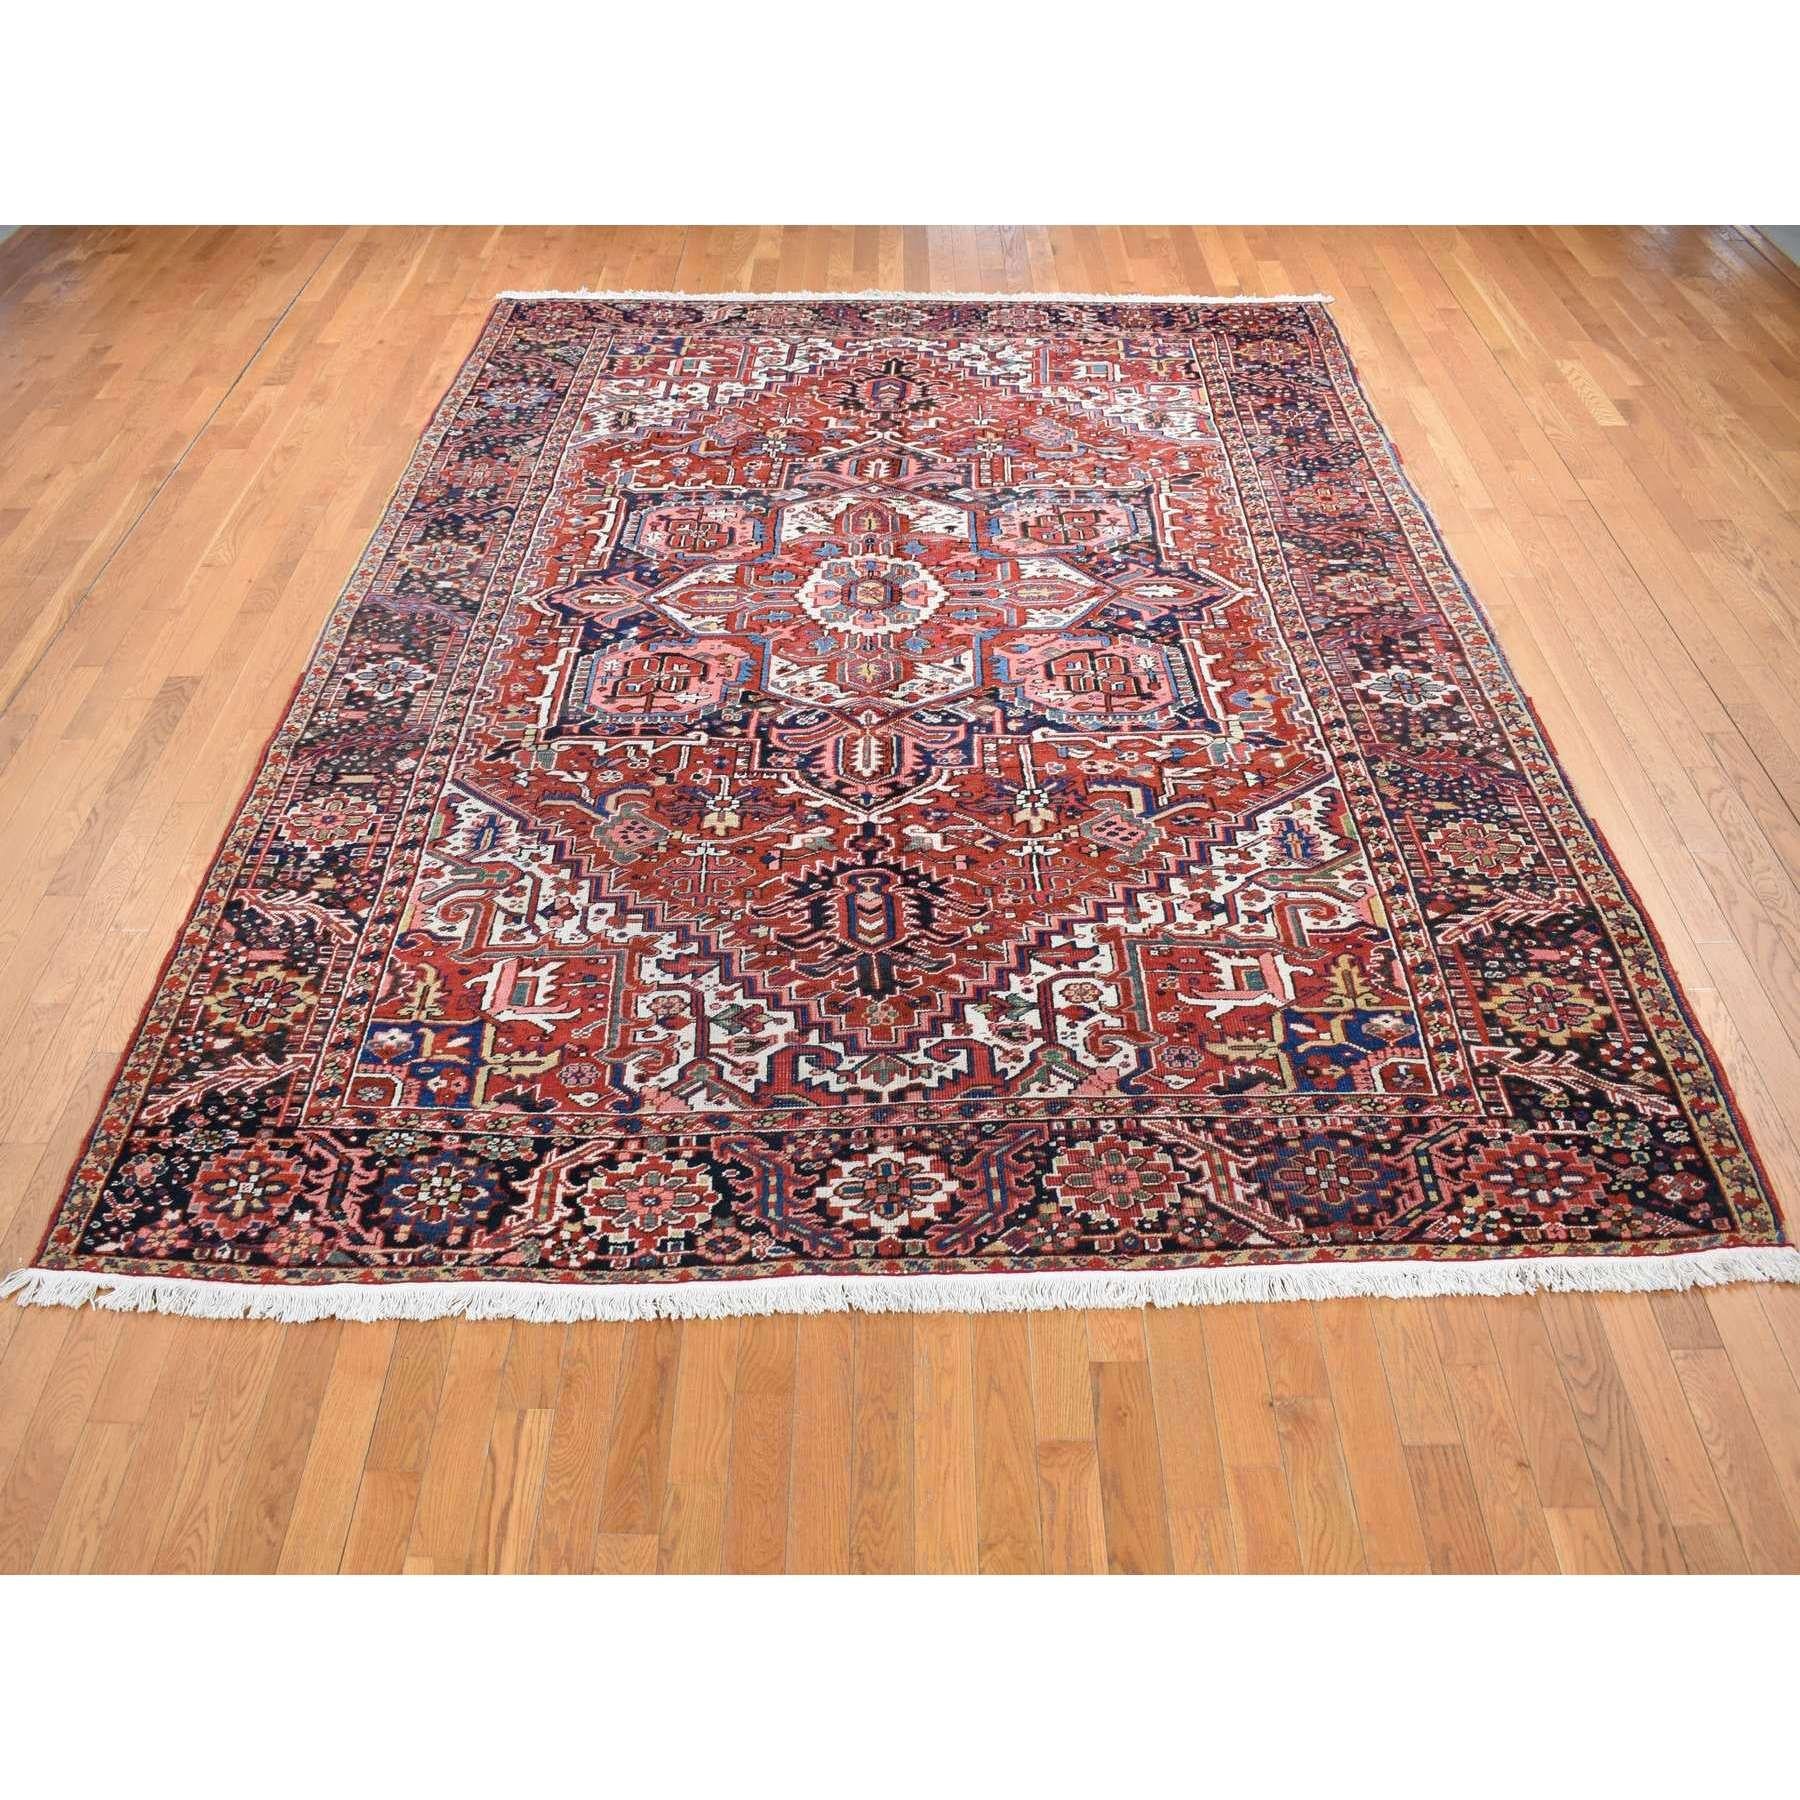 Medieval Chili Red Antique Persian Heriz Soft and Full Pile Pure Wool Hand Knotted Rug For Sale